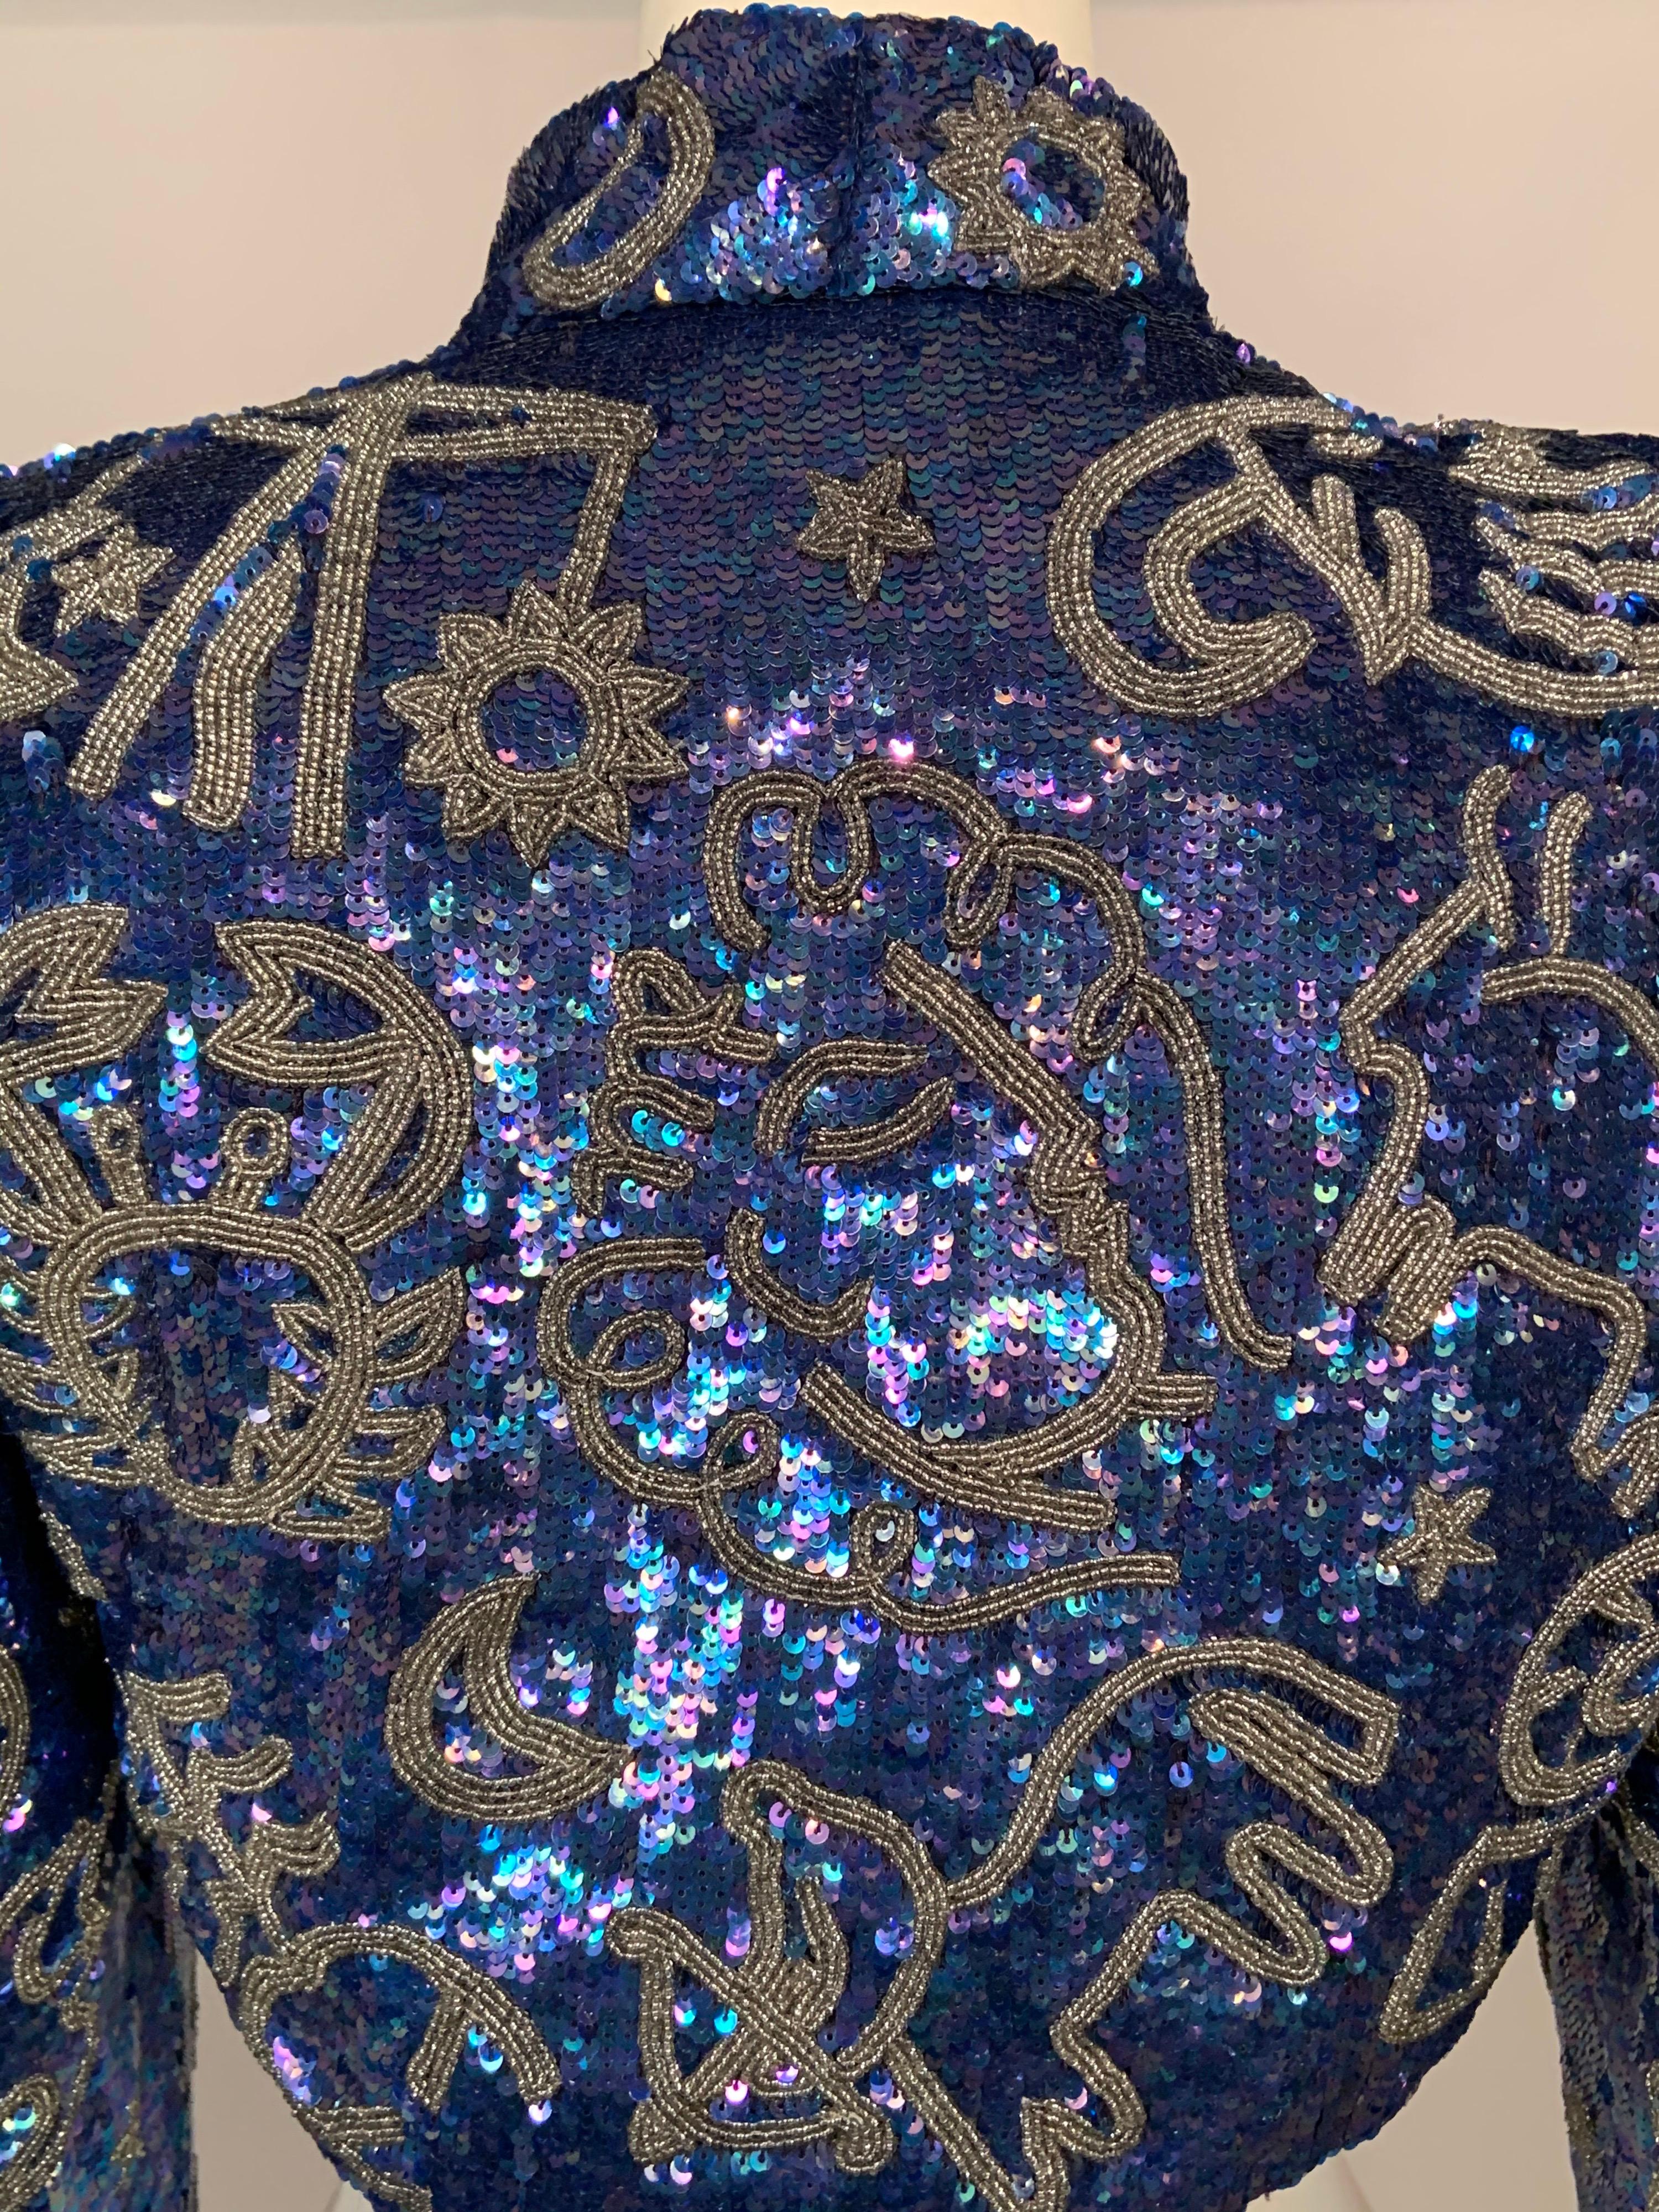 Glistening blue opalescent sequins cover the surface of this striking bolero. The twelve Signs of the Zodiac are done in silver caviar beads, in addition to the beaded sun, moon and stars that are scattered across the jacket. Schiaparelli is well